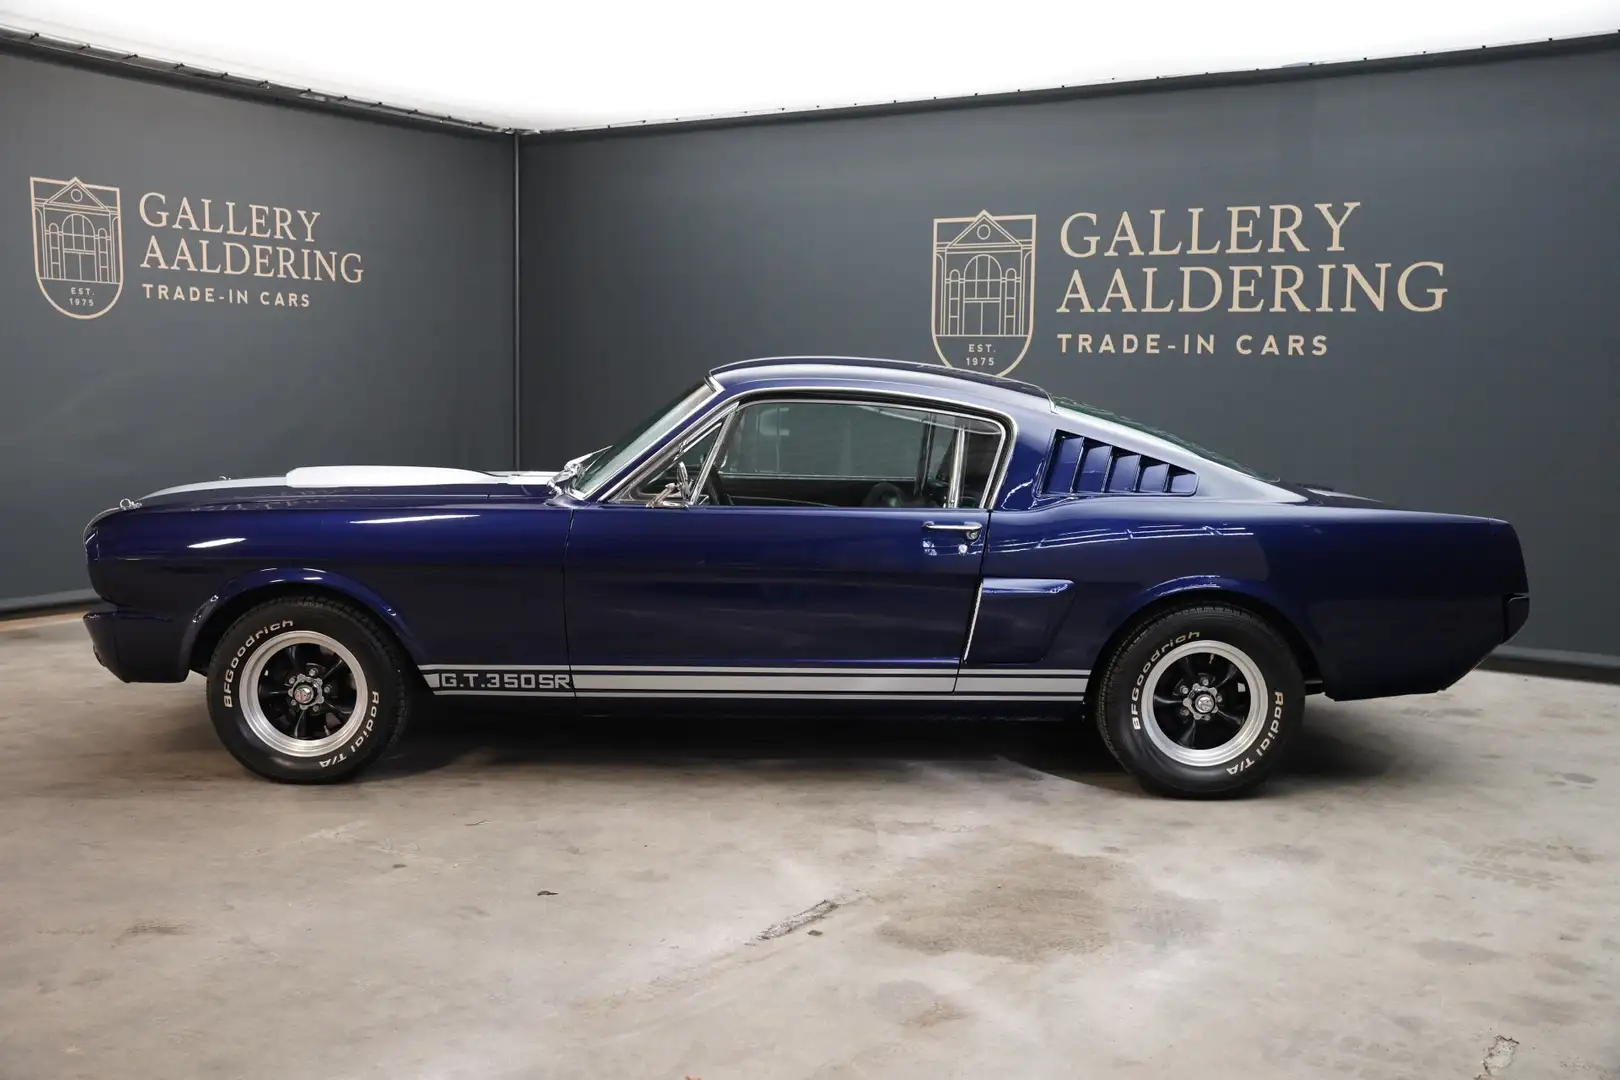 Ford Mustang Fastback "Shelby 350 SR Clone" (A-code) Trade-in c Blauw - 2